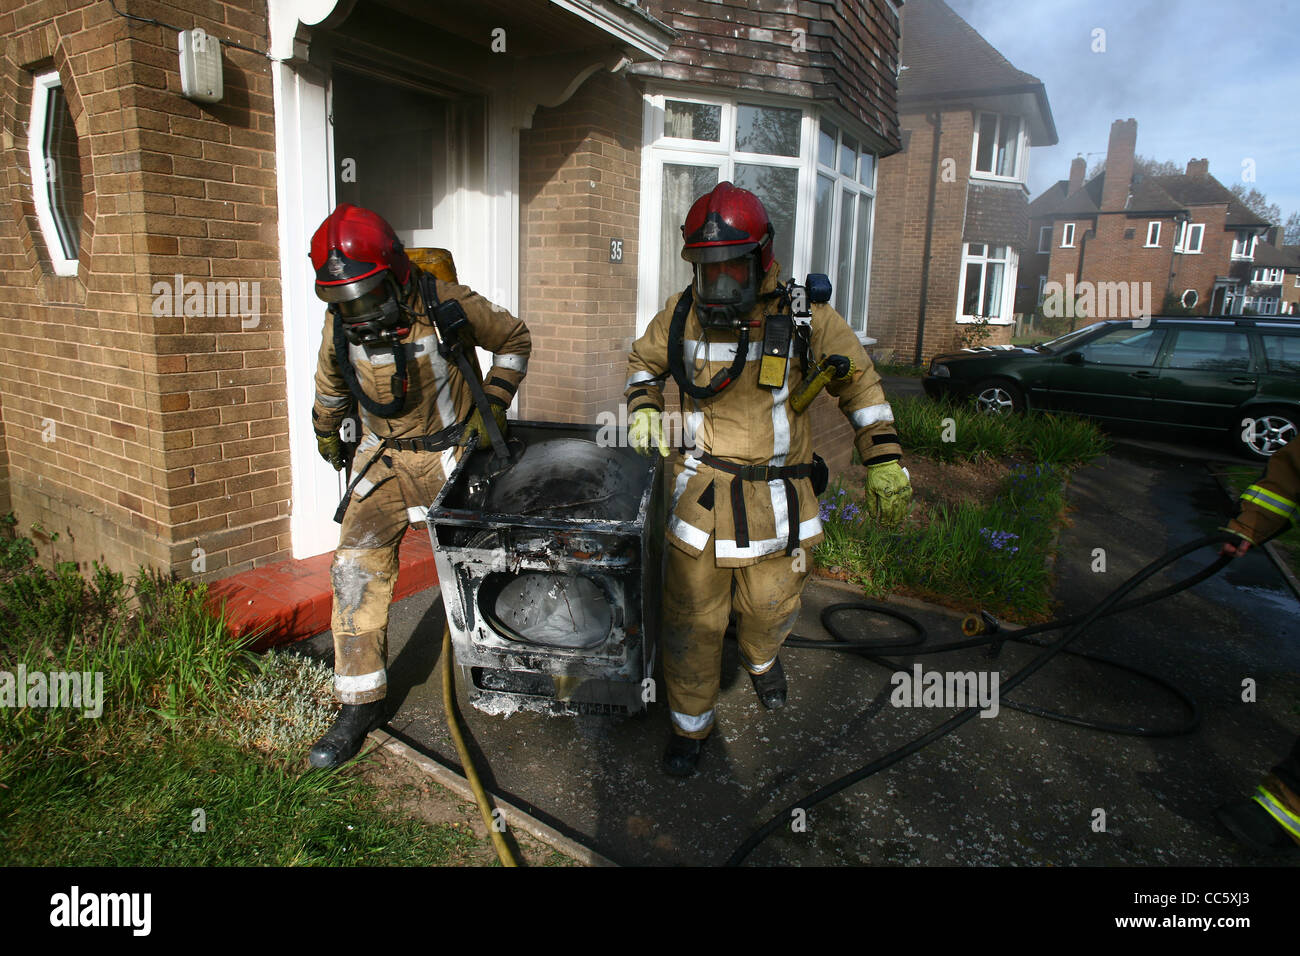 Two firefighters remove a fire damaged tumble dryer involved in a house fire. Stock Photo